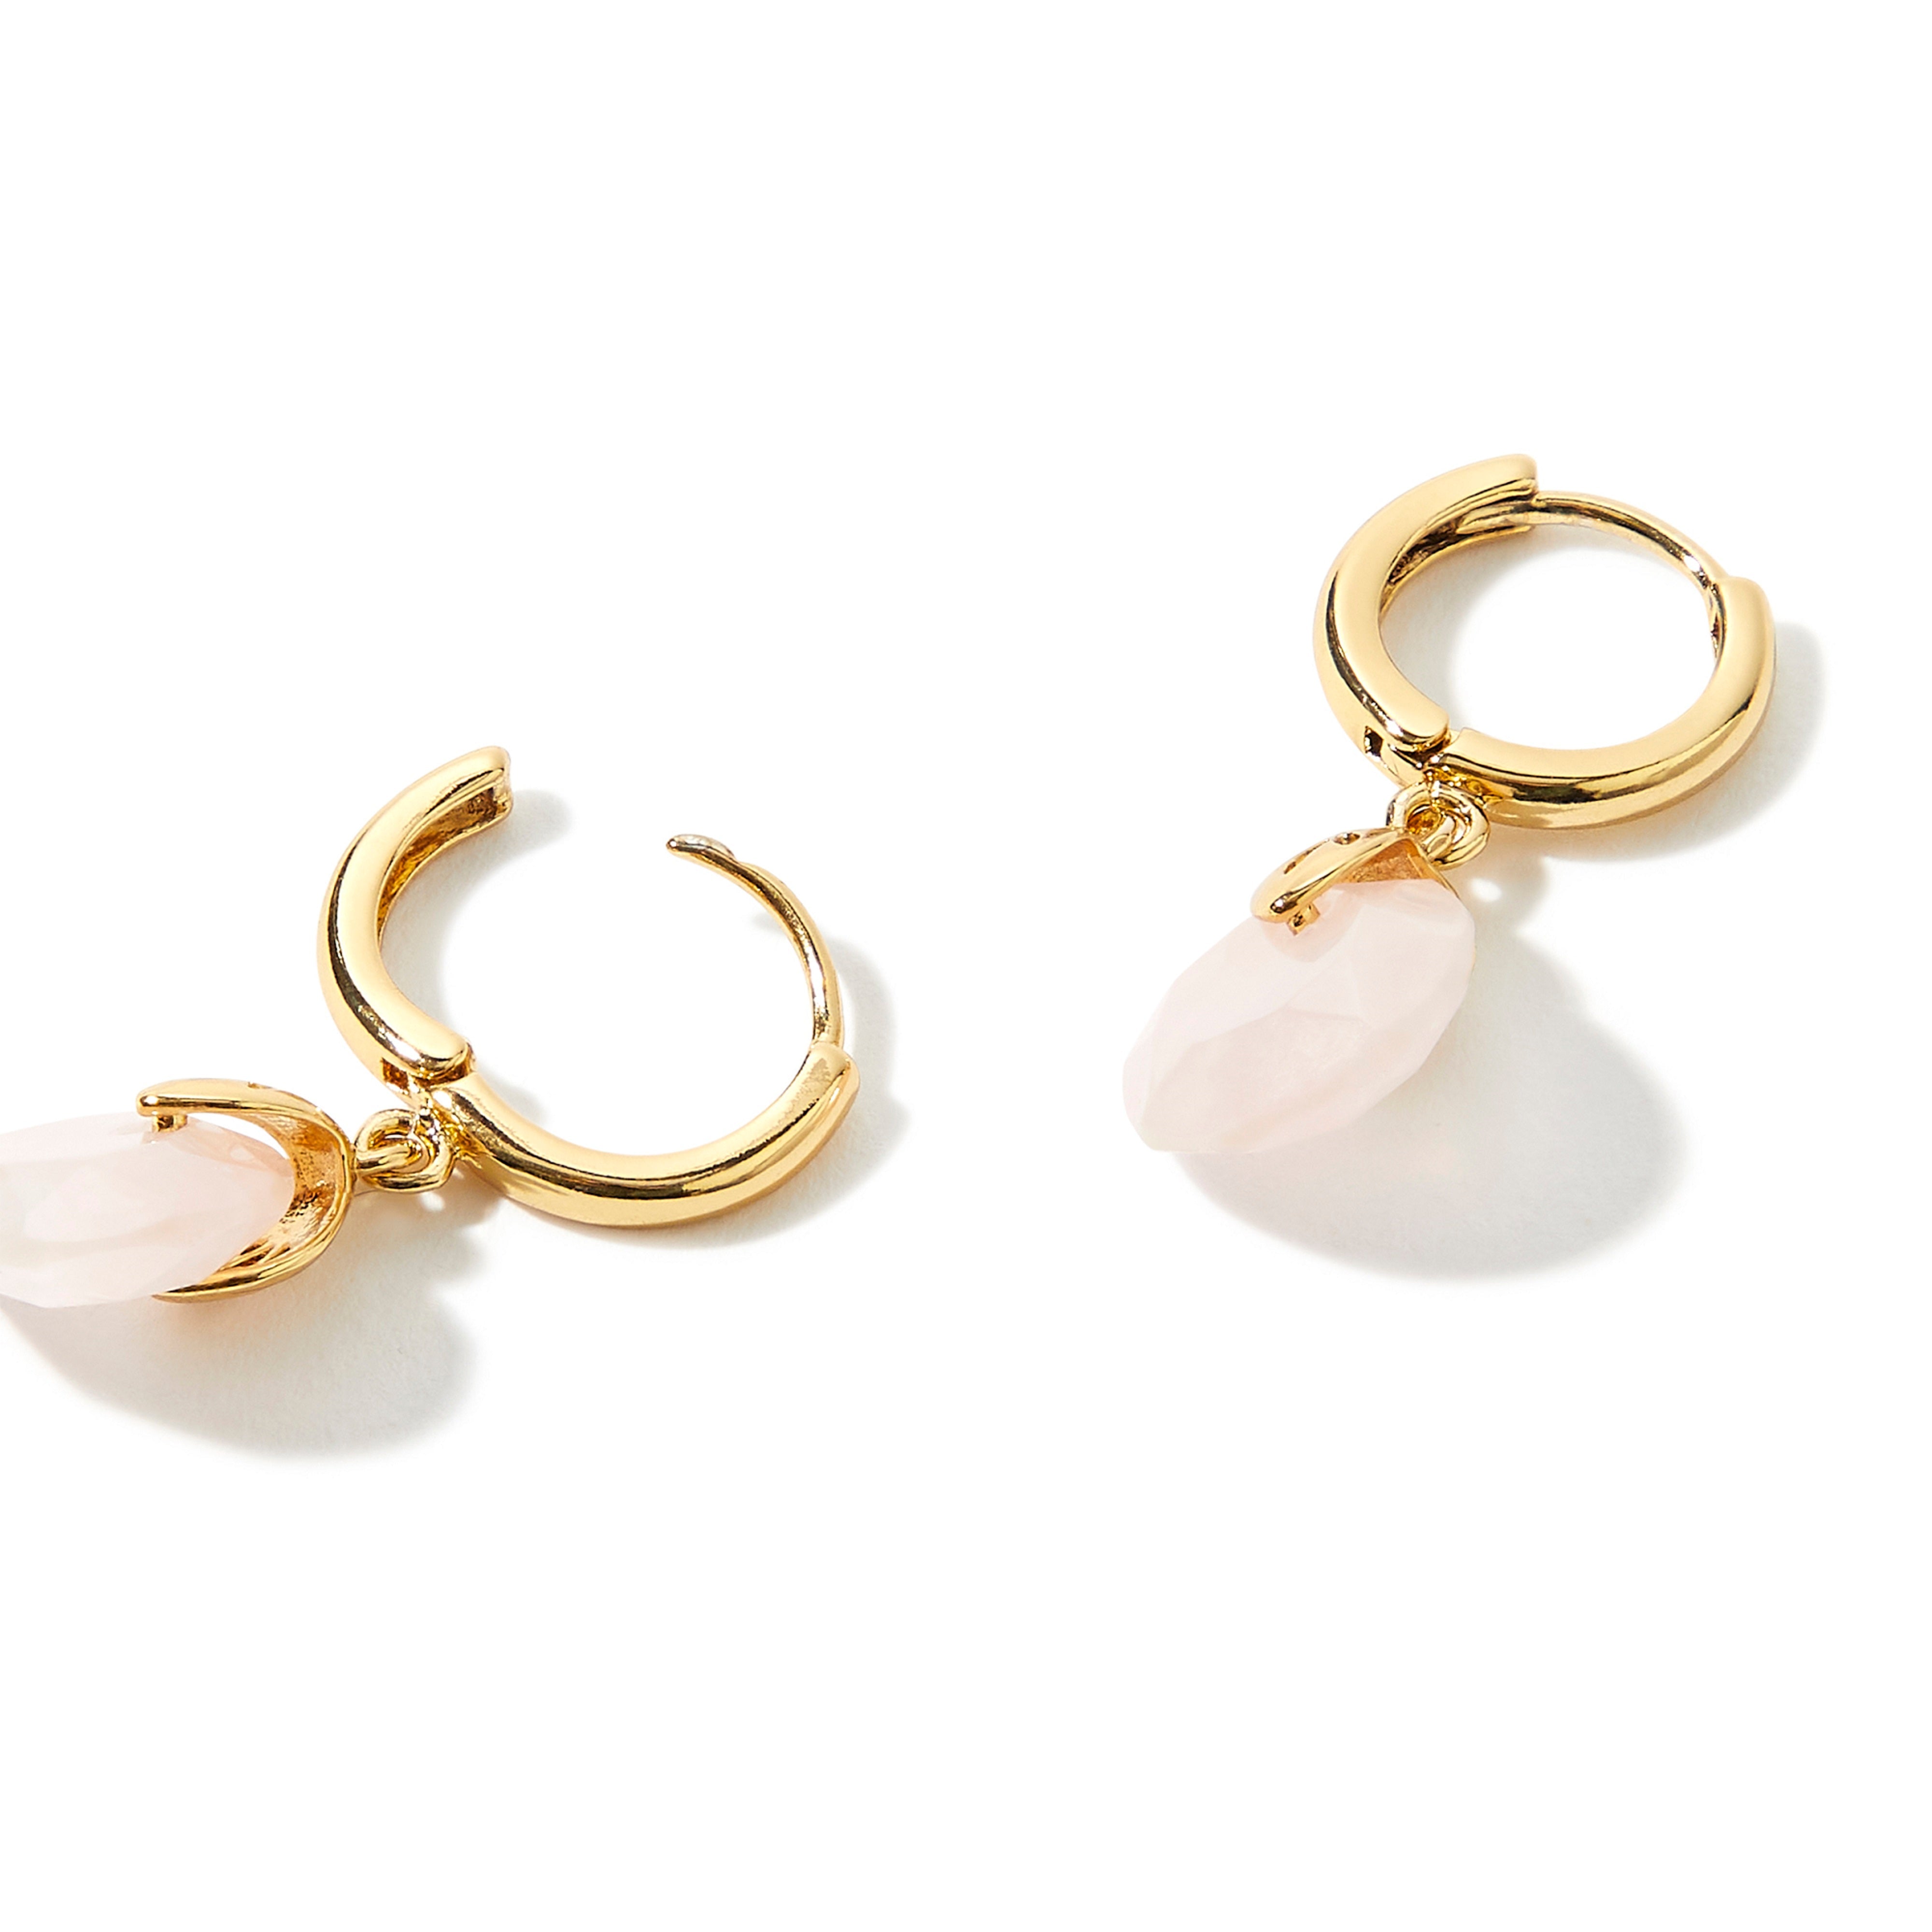 Real Gold Plated Circle Healing Stone Hoops Earring Rose Quartz For Women By Accessorize London